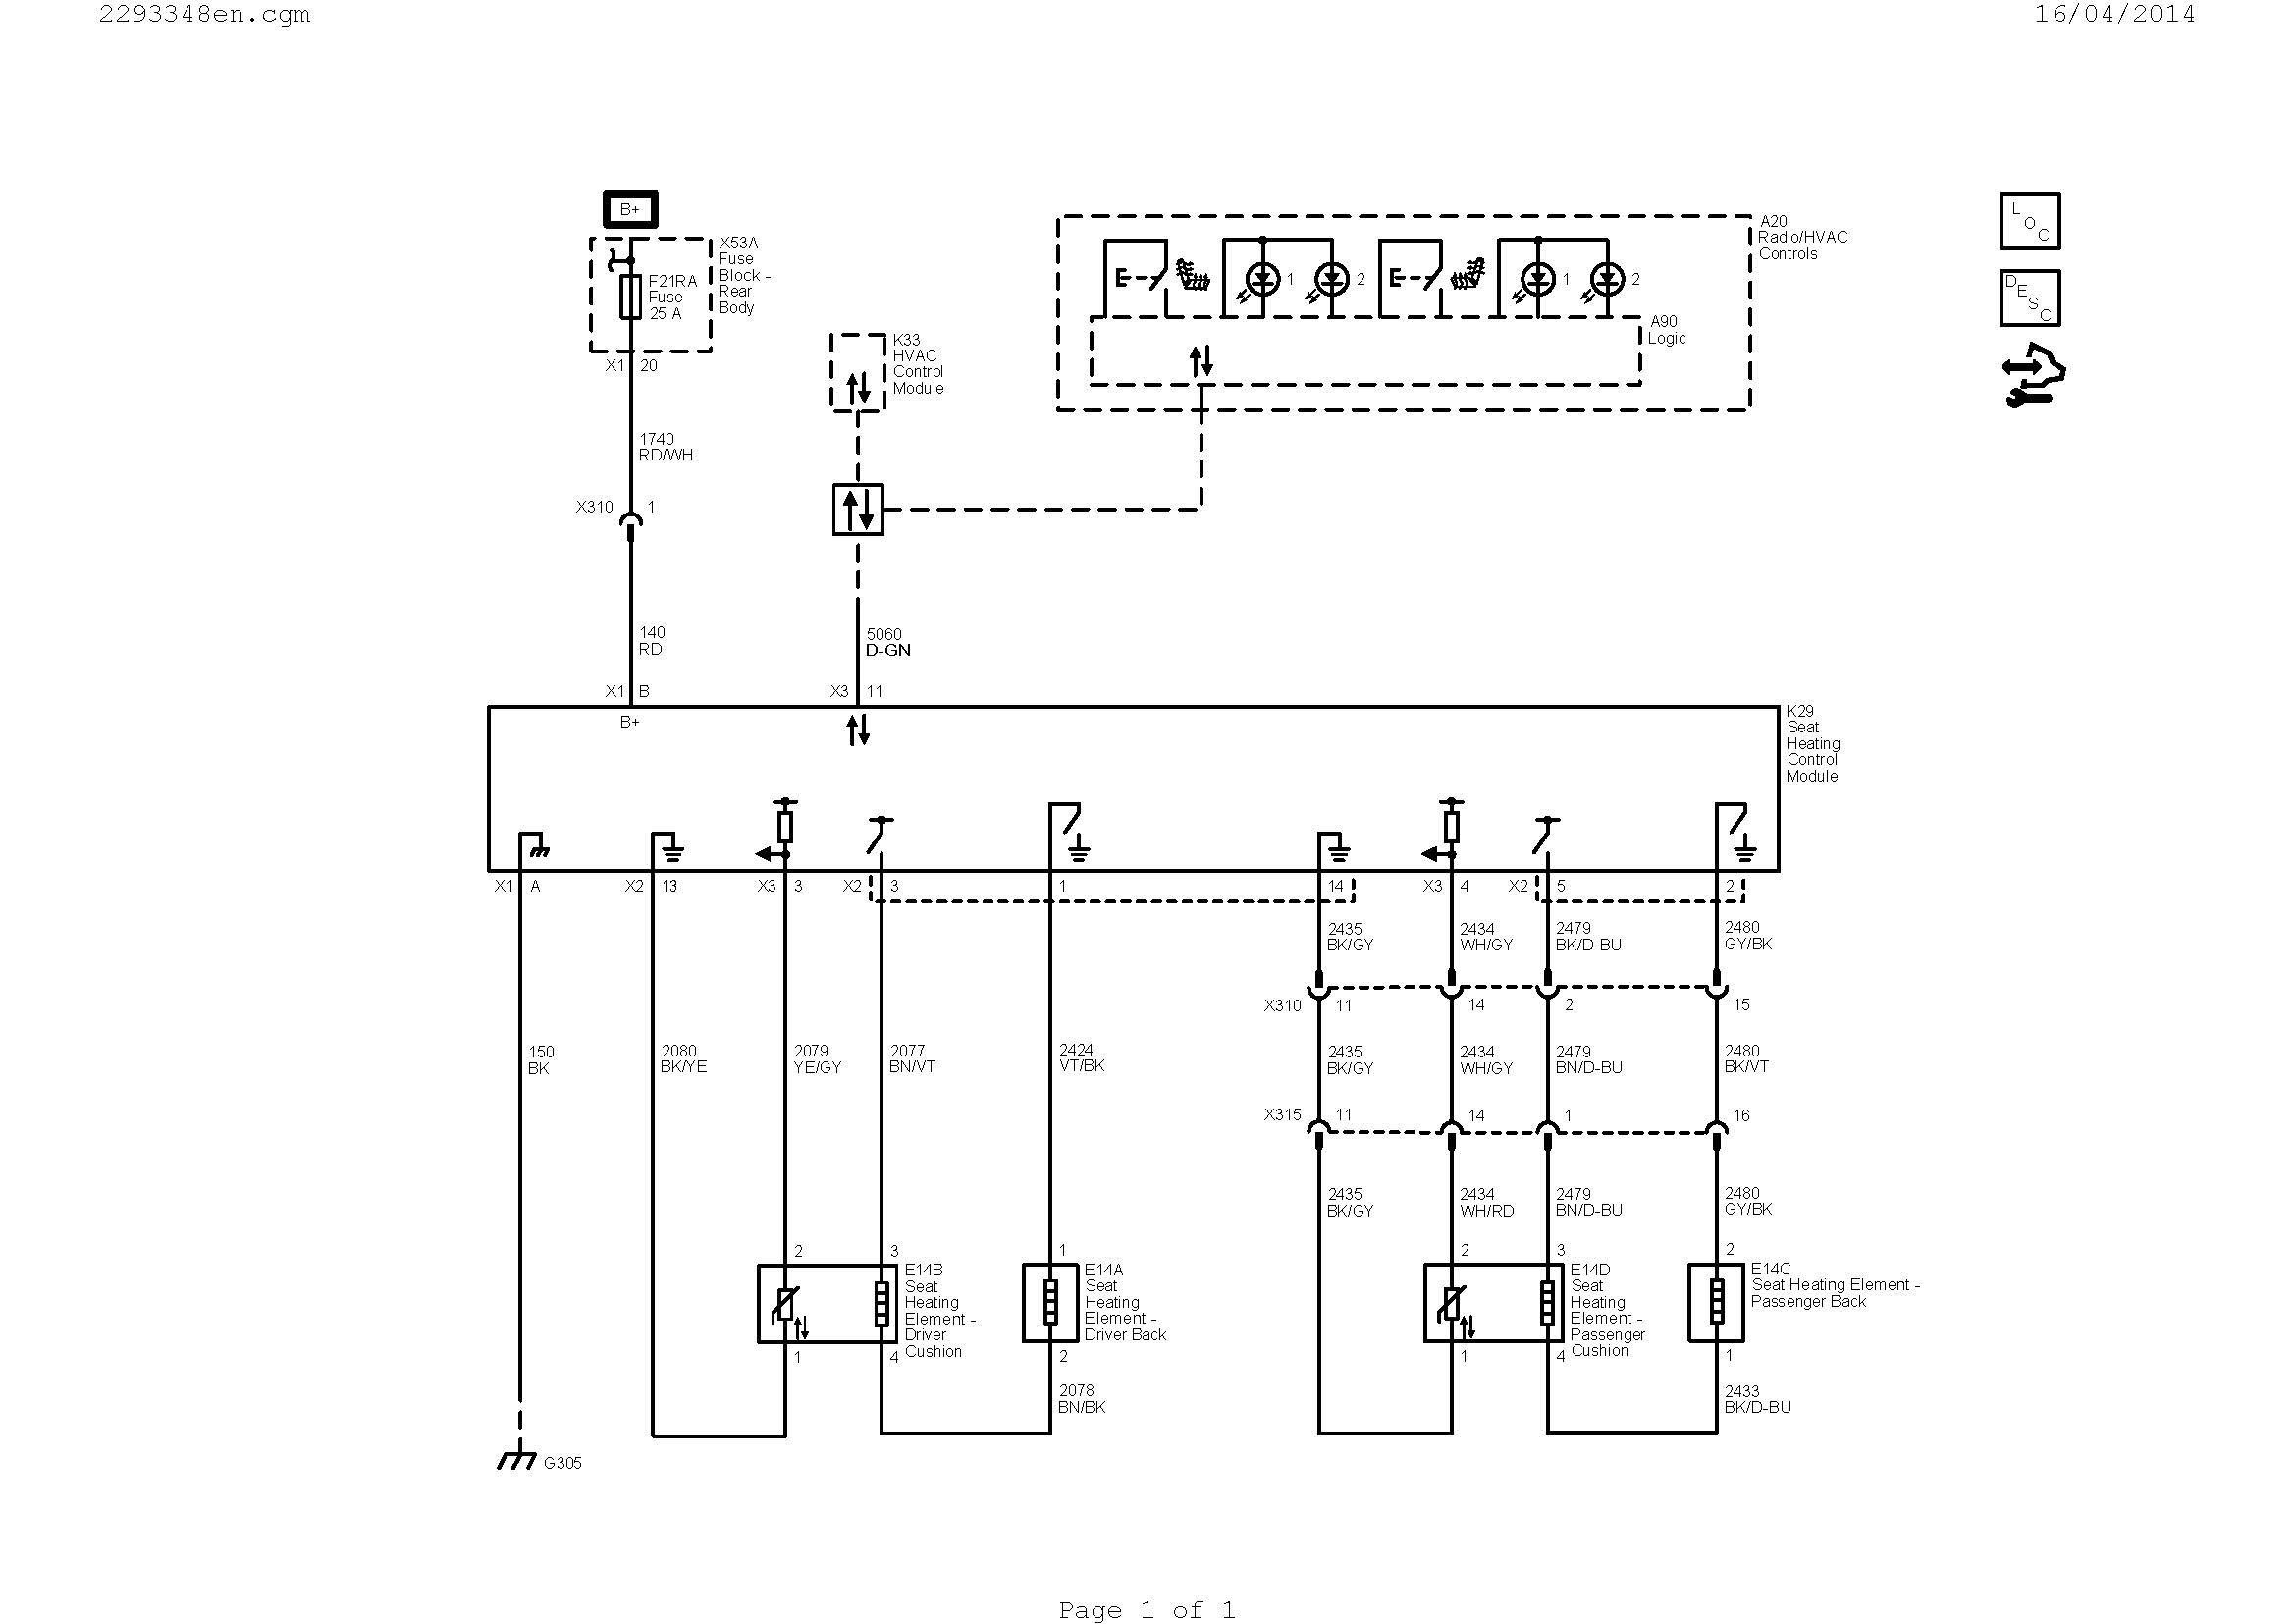 Wiring Diagram for Motor to Drum Switch New Electric Motor Reversing Switch Wiring Diagram Collection